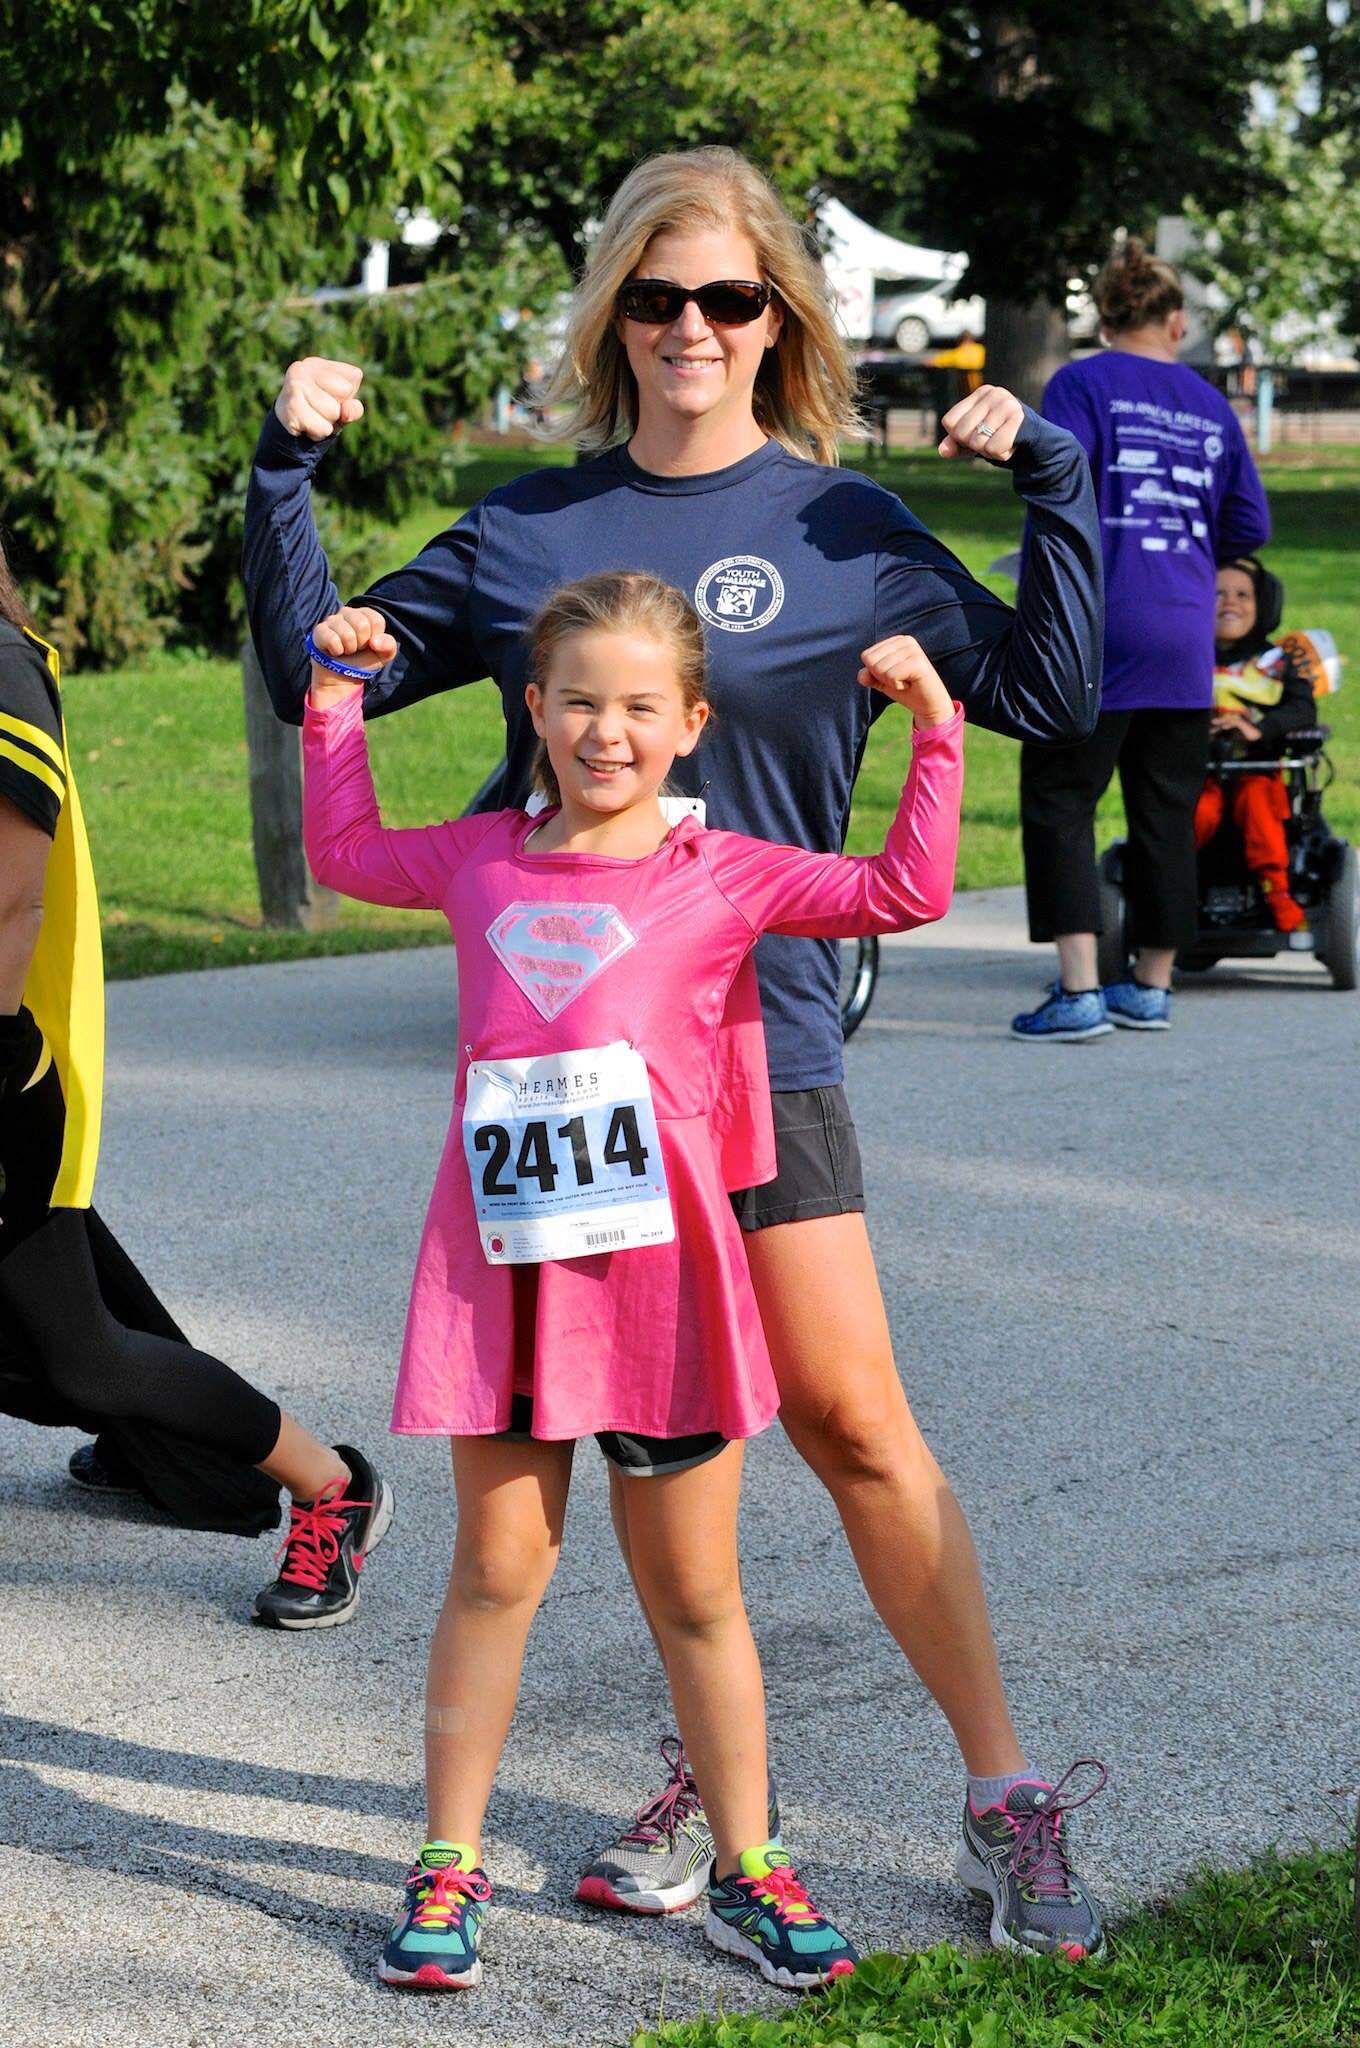 Sharon with daughter Lucy at the YC Superhero Dash.